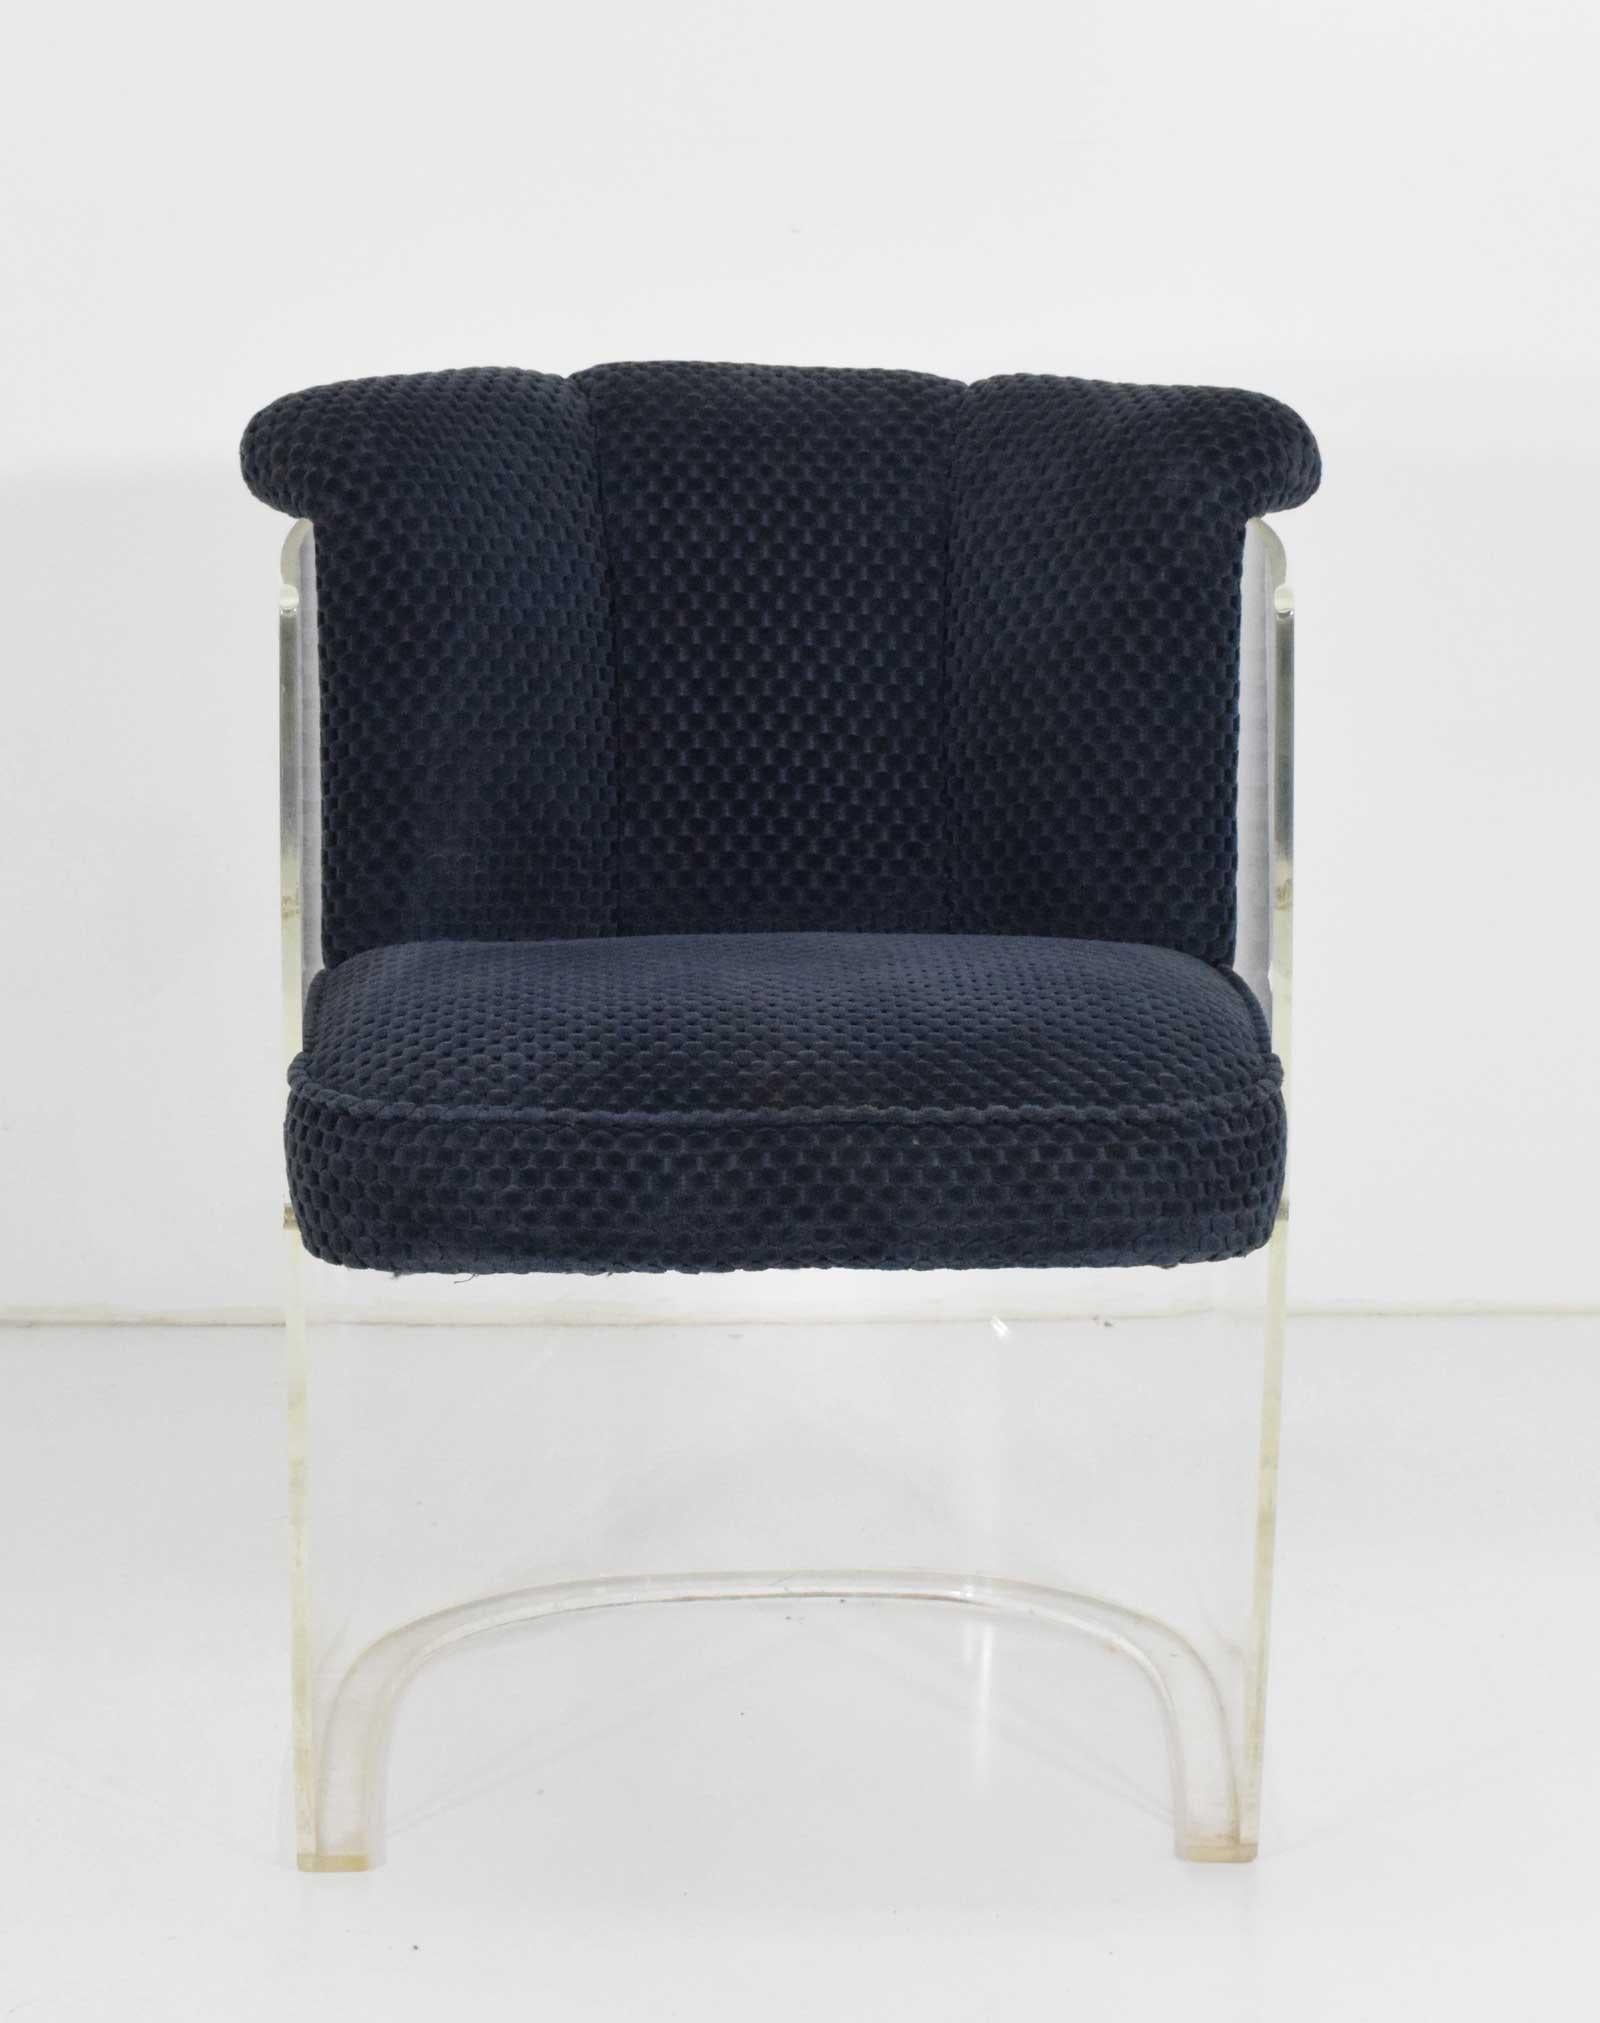 This is the 6550 Cycle III dining chair by Vladimir Kagan. First introduced in 1967 and currently in production. Chairs feature a barrel Lucite frame that is one piece, seat cushion floats with a Lucite bar under the front side of the seat for